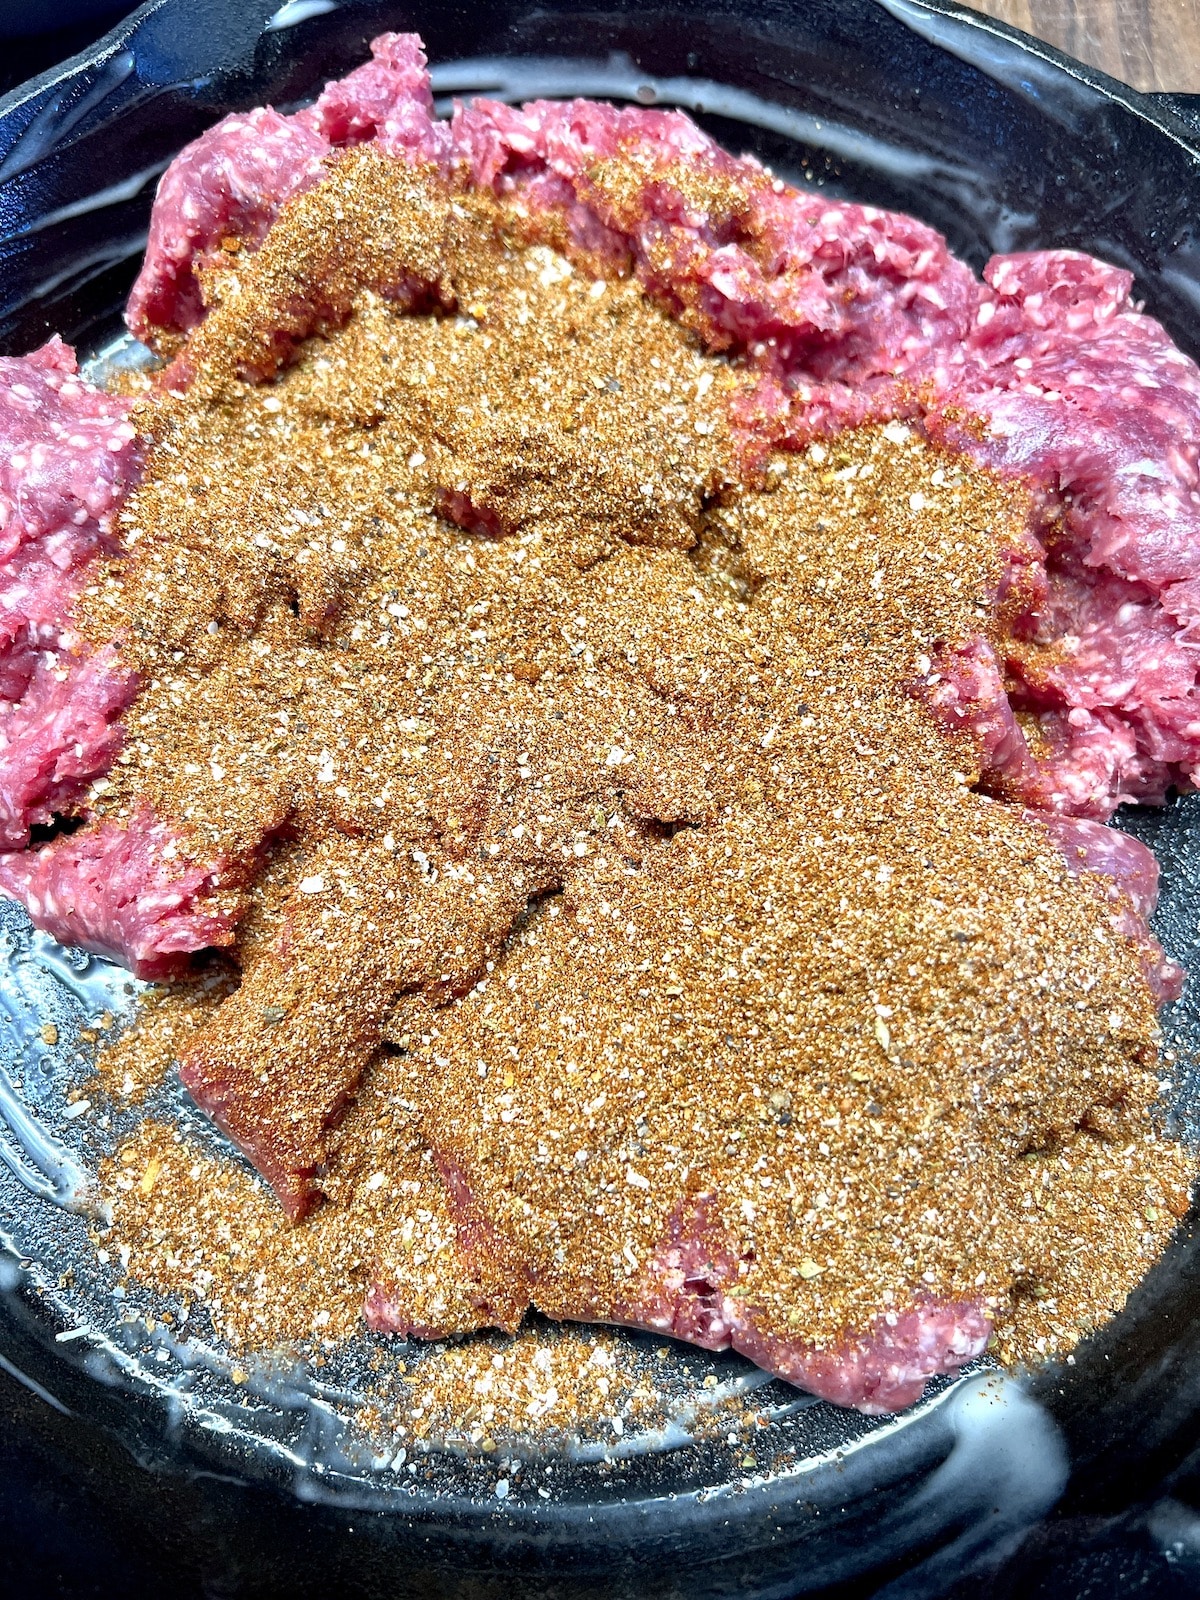 Ground beef with taco seasoning in skillet.